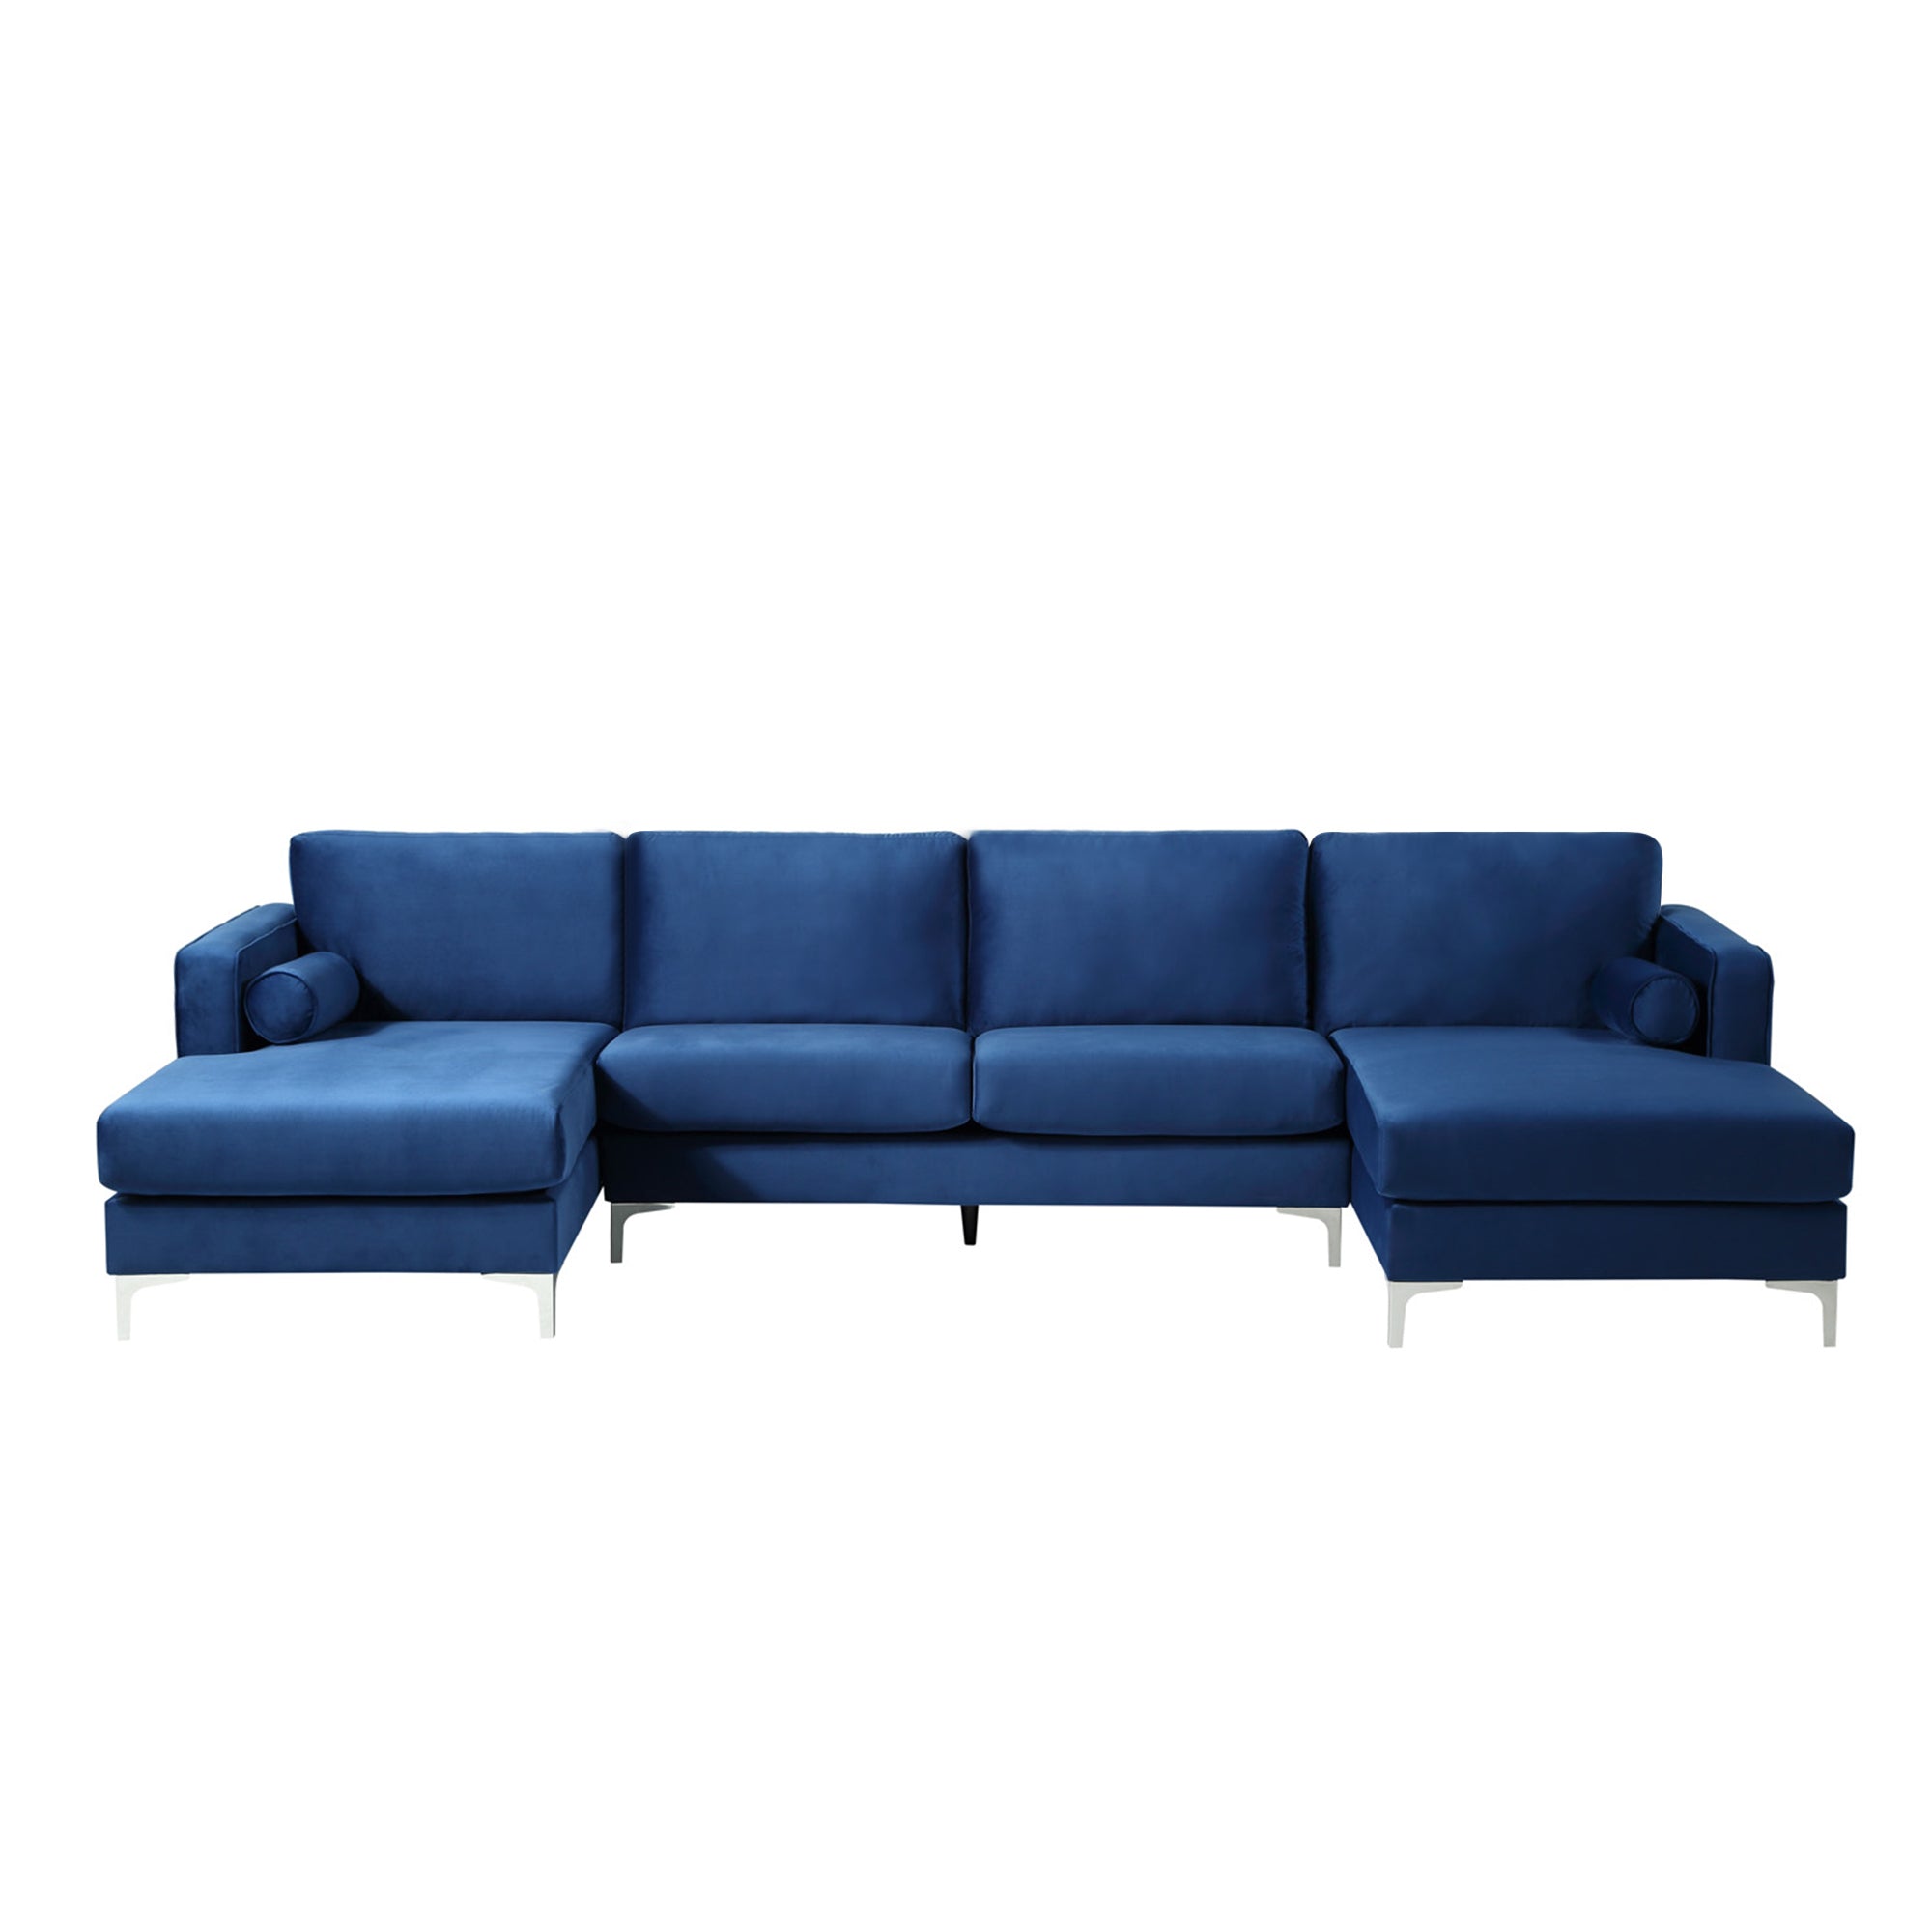 Upholstered Sectional Sofa with Two Pillows-Boyel Living